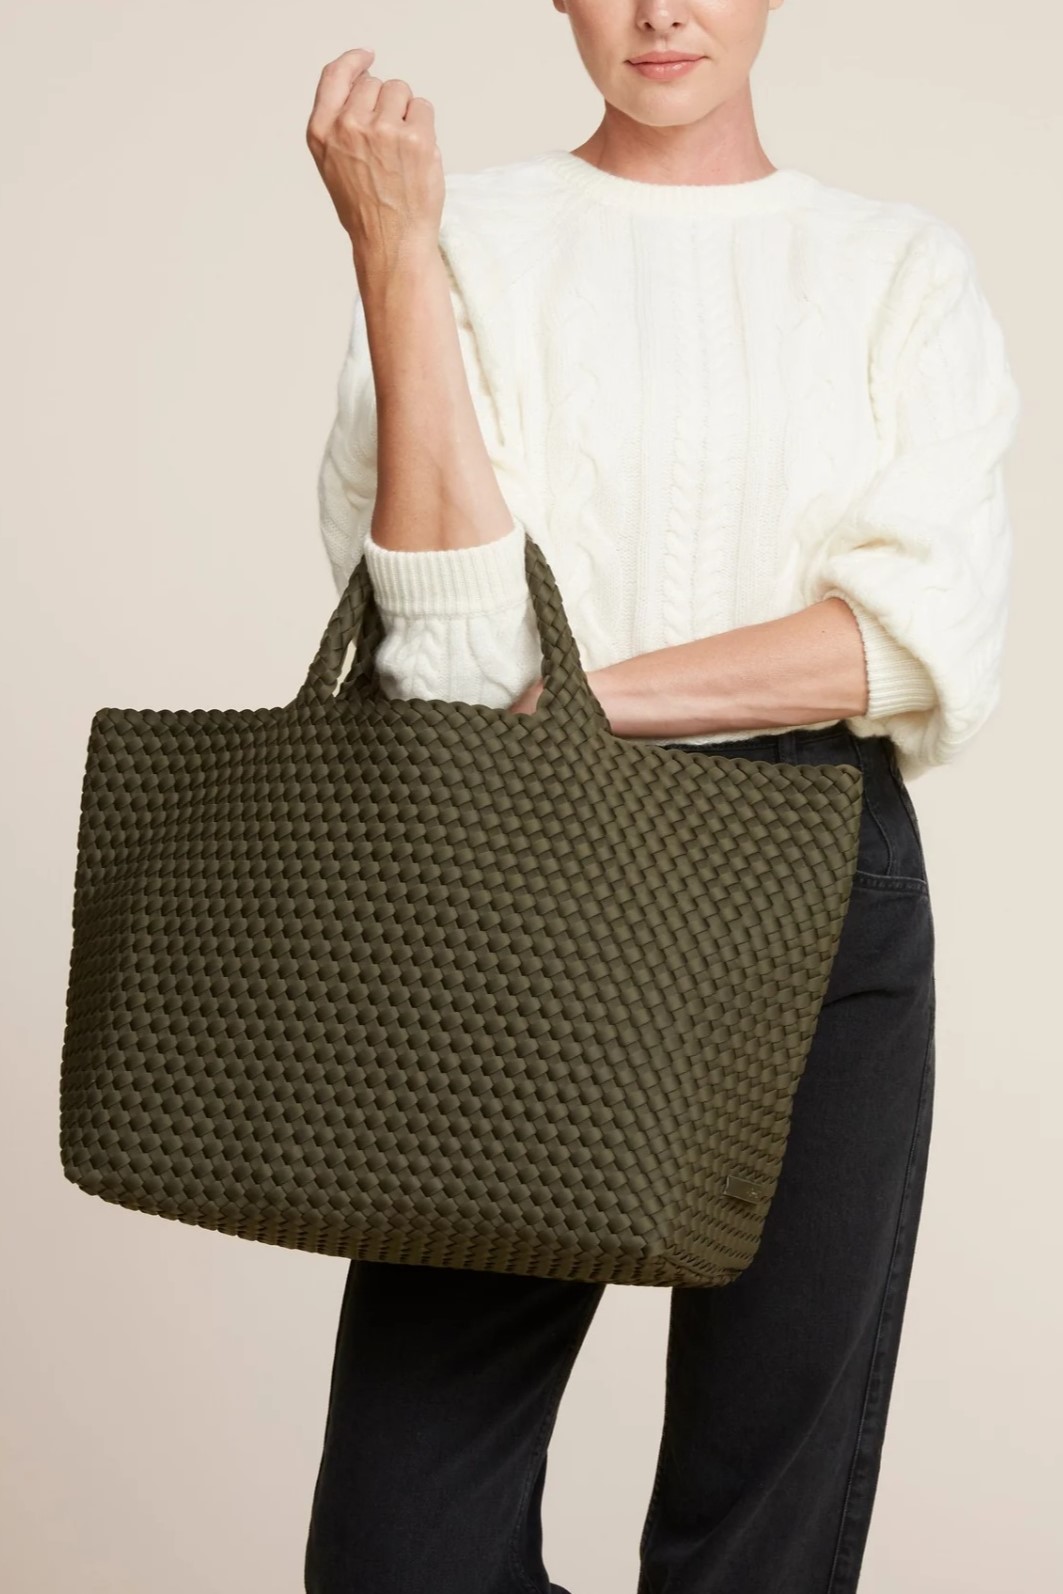 NAGHEDI Handwoven Large Tote St. Barth in Olive